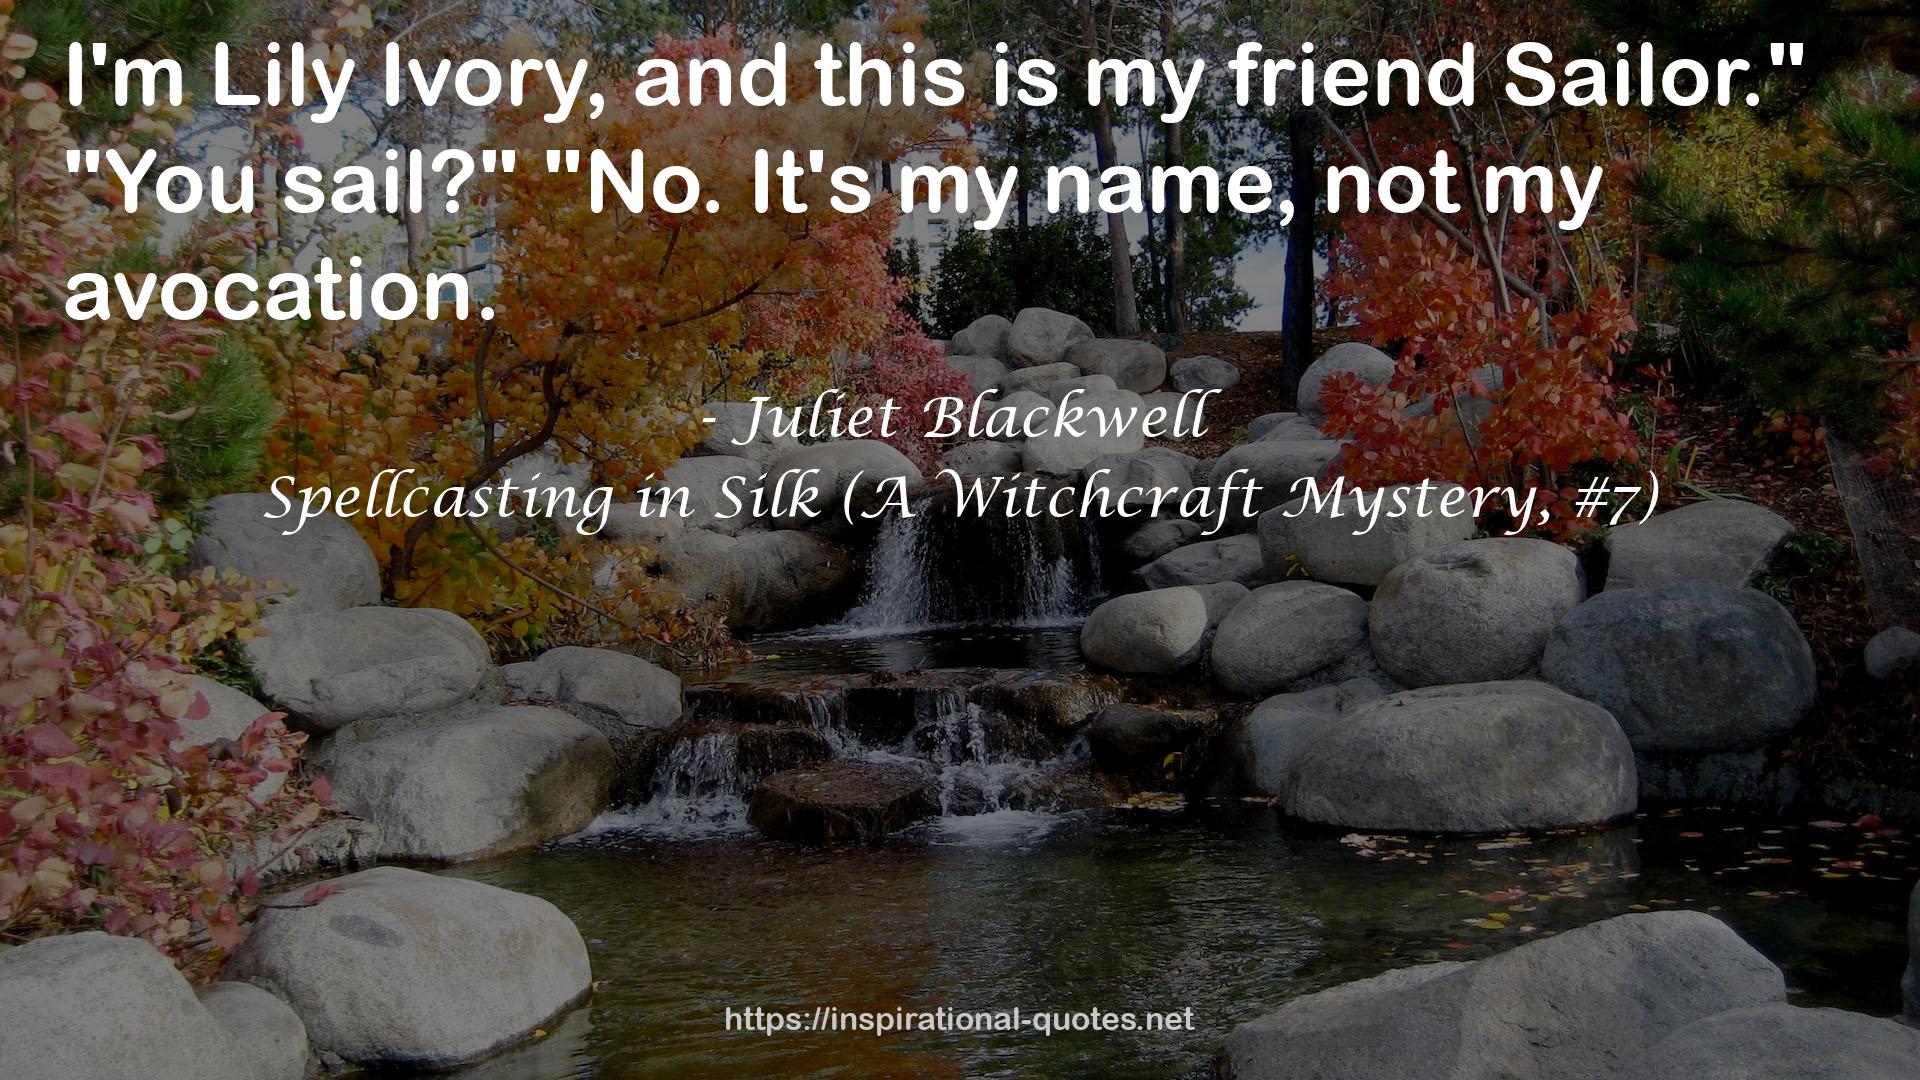 Spellcasting in Silk (A Witchcraft Mystery, #7) QUOTES